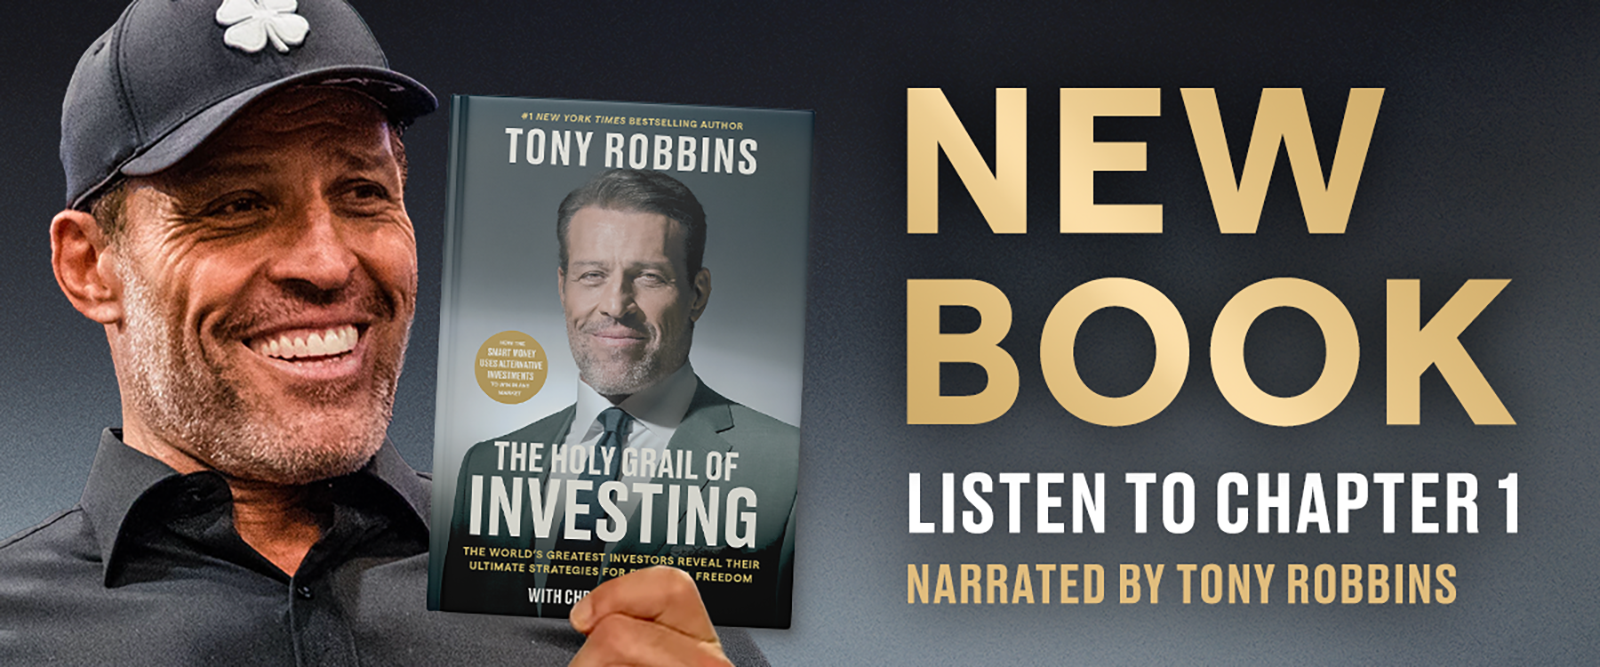 Tony Robbins Podcasts: The Official Collection